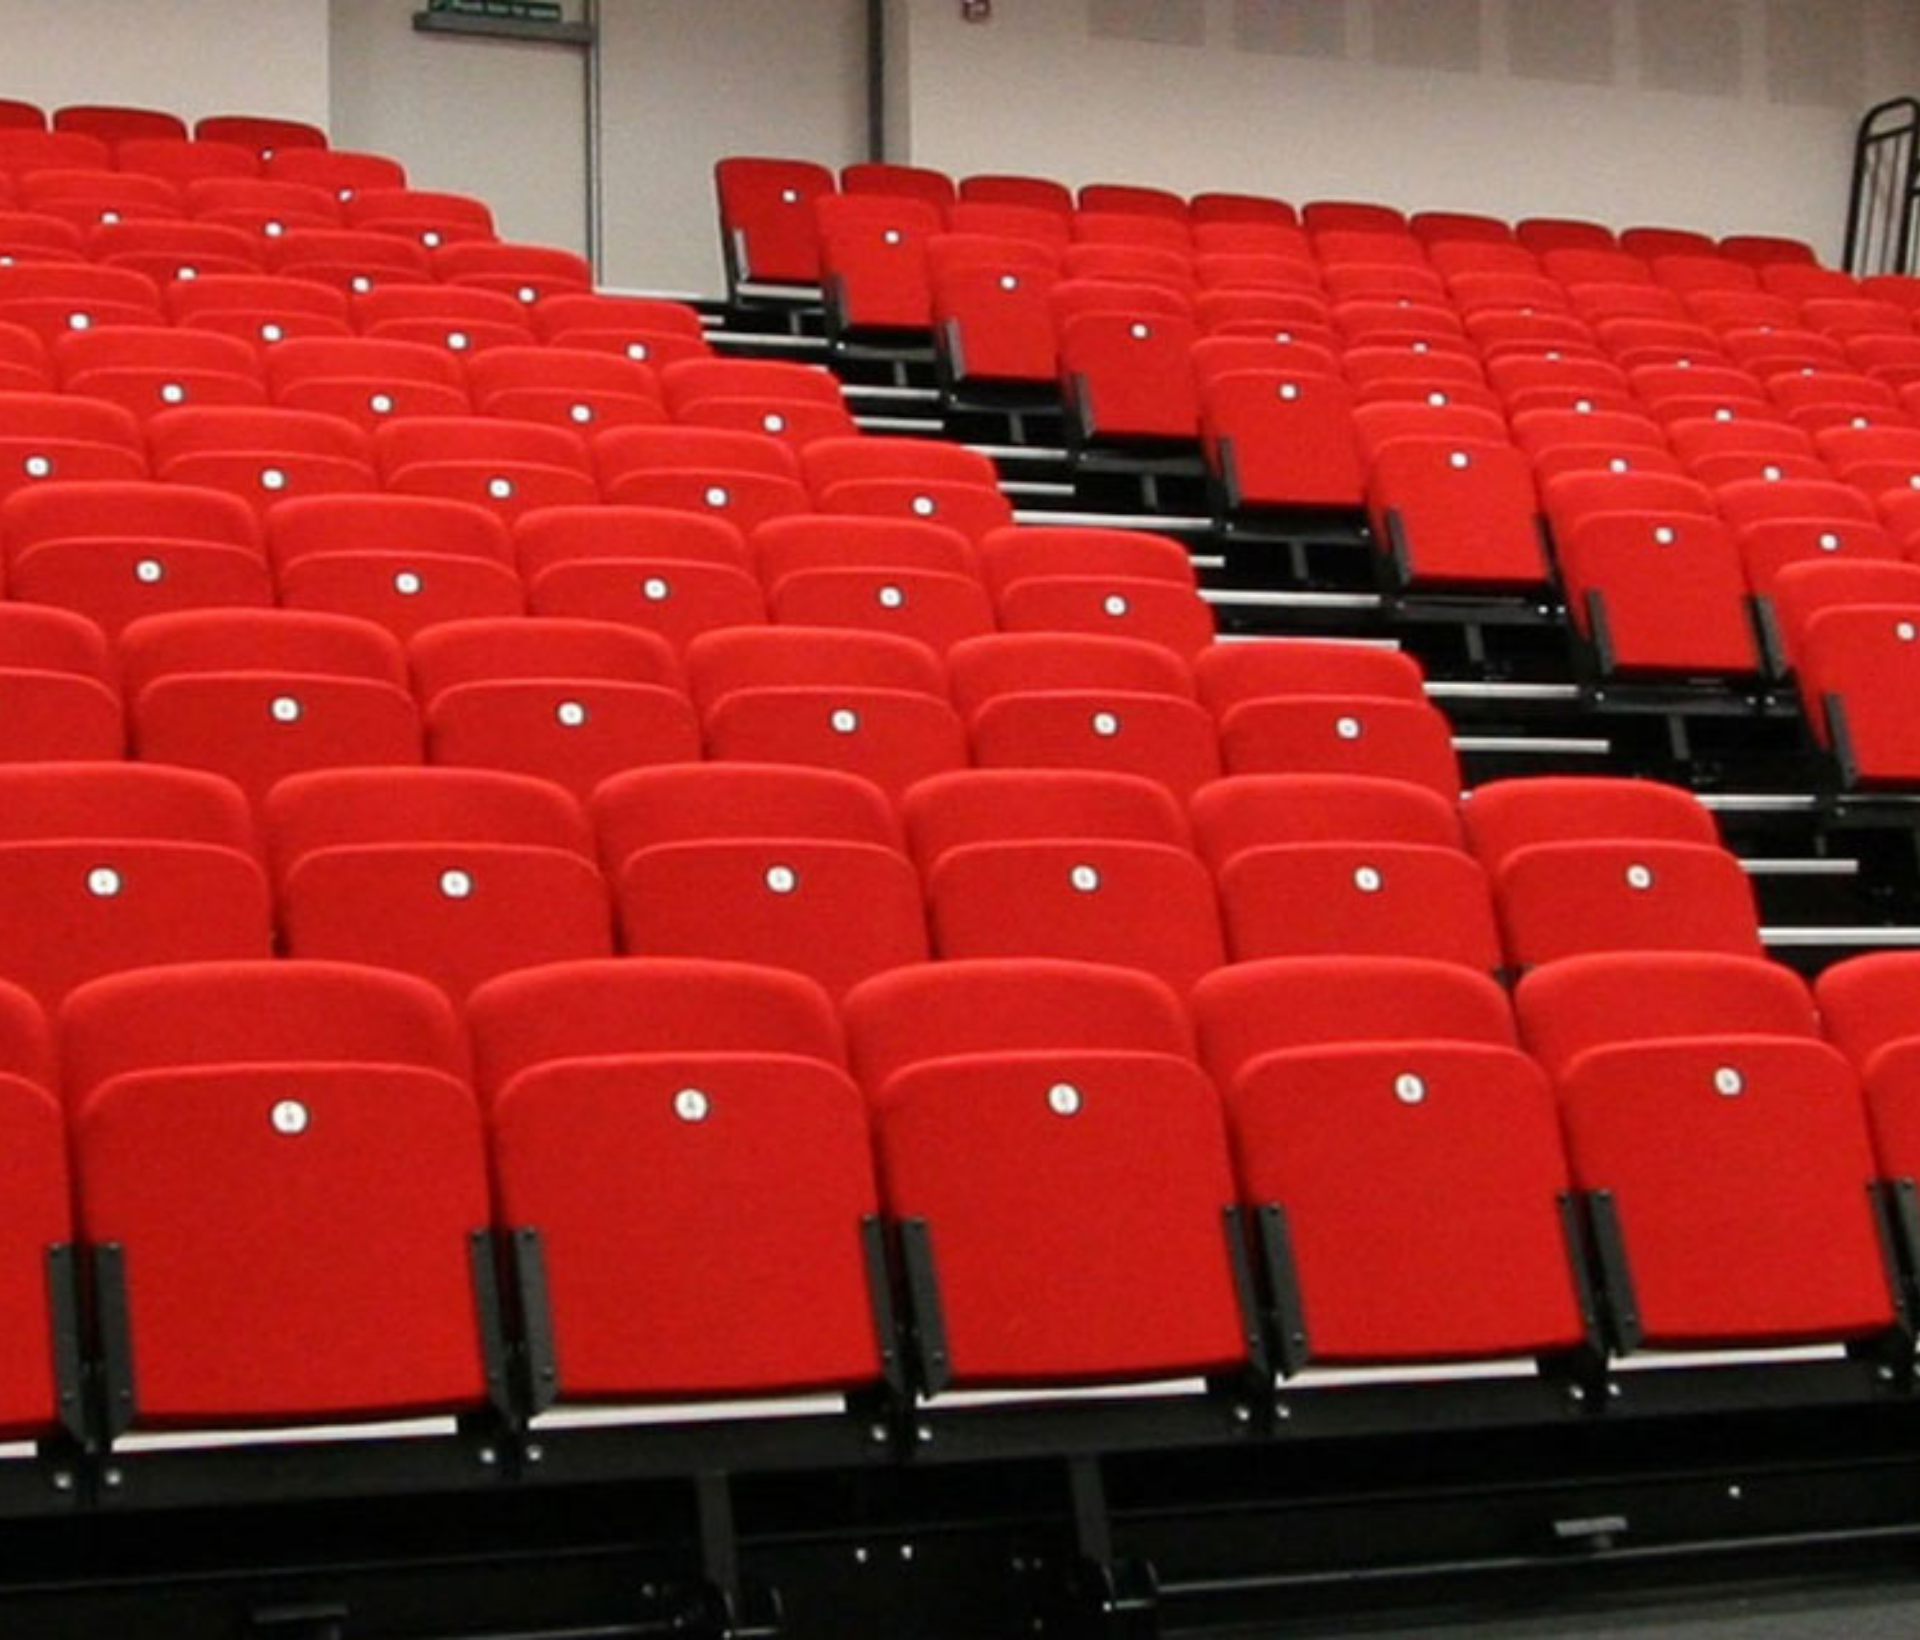 A large auditorium with rows of tiered seating and stairs.